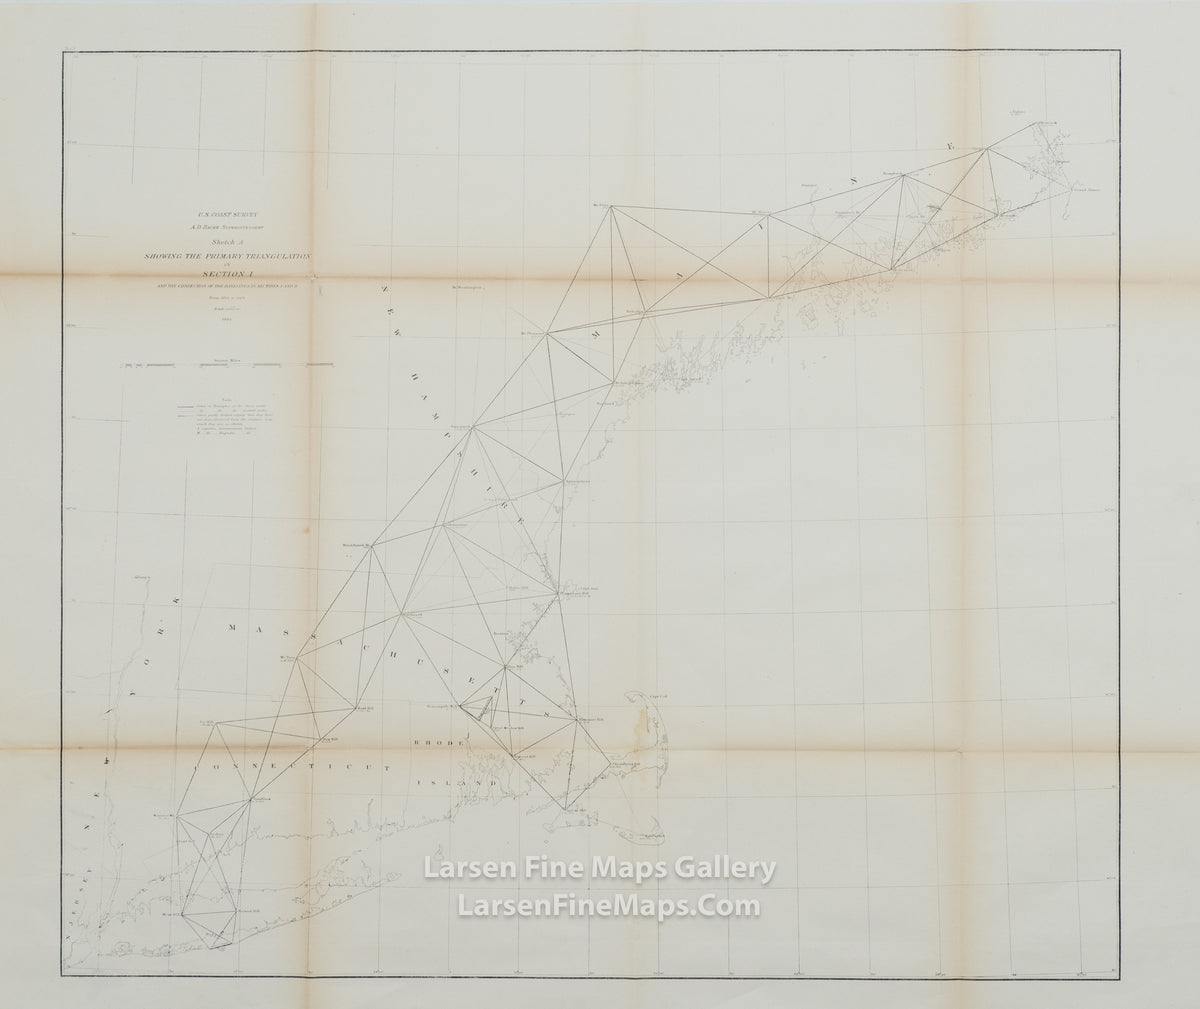 U.S. Coast Survey A.D. Bache Superintendent, Sketch A Showing the Primary Triangulation in Section I and the Connection of The Baselines in Sections I and II From 1844 to 1864